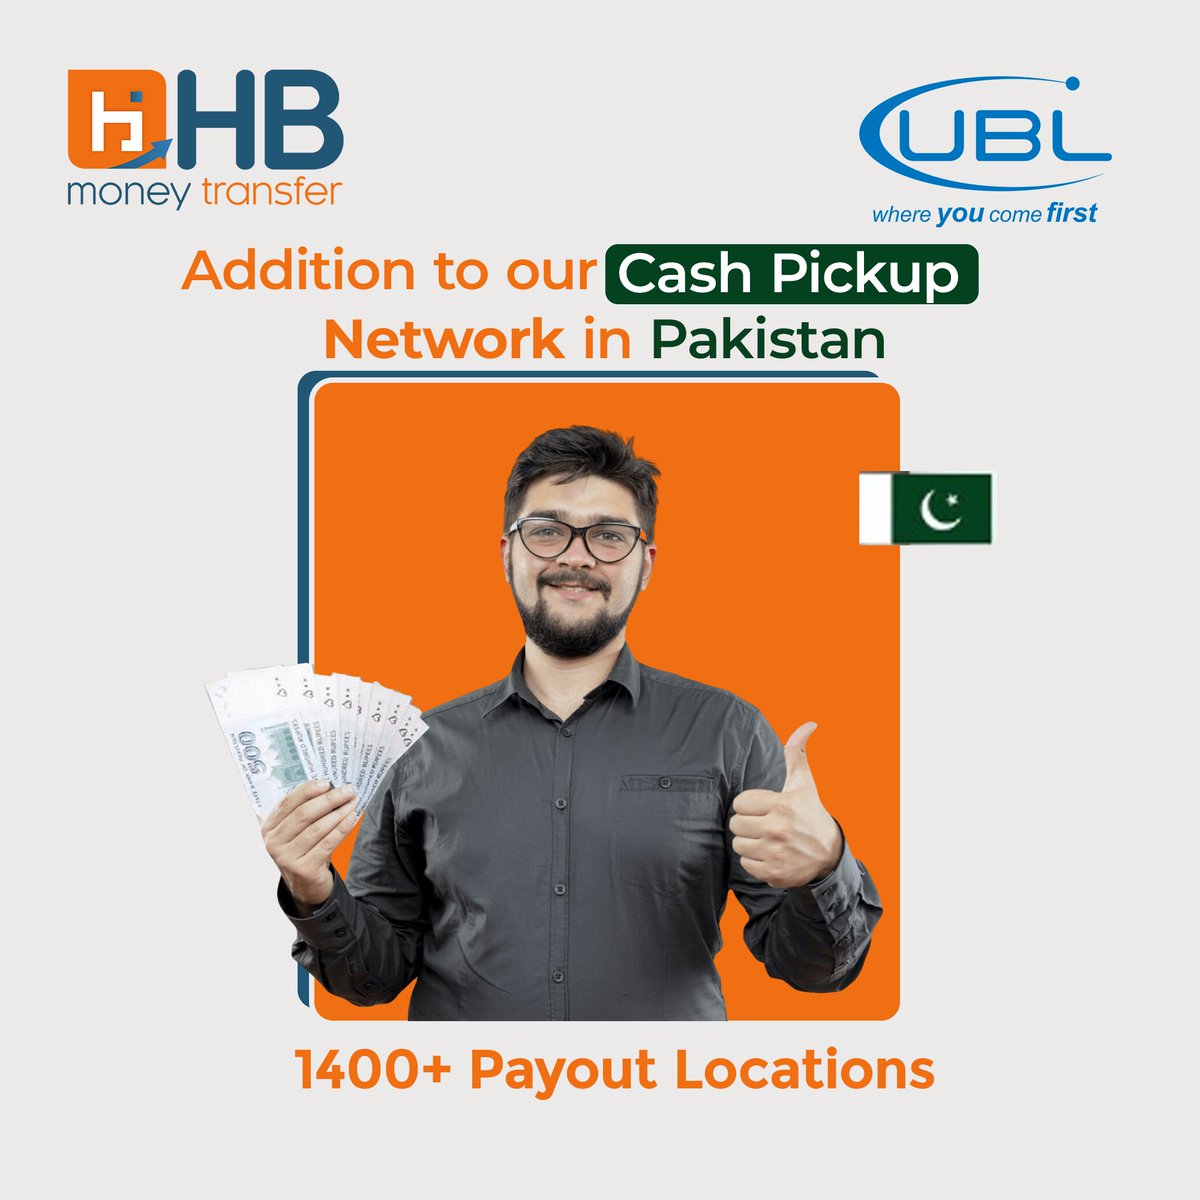 Send money via #HBMoneyTransfer - the fast, secure & convenient way! With 1400+ cash pickup locations across Pakistan, money is just a few clicks away! #UBLMoneyTransfer #UBLPakistan #EasyMoneyTransfer #MoneyInMinutes #DigitalMoneyTransfer #SecureMoneyTransfer